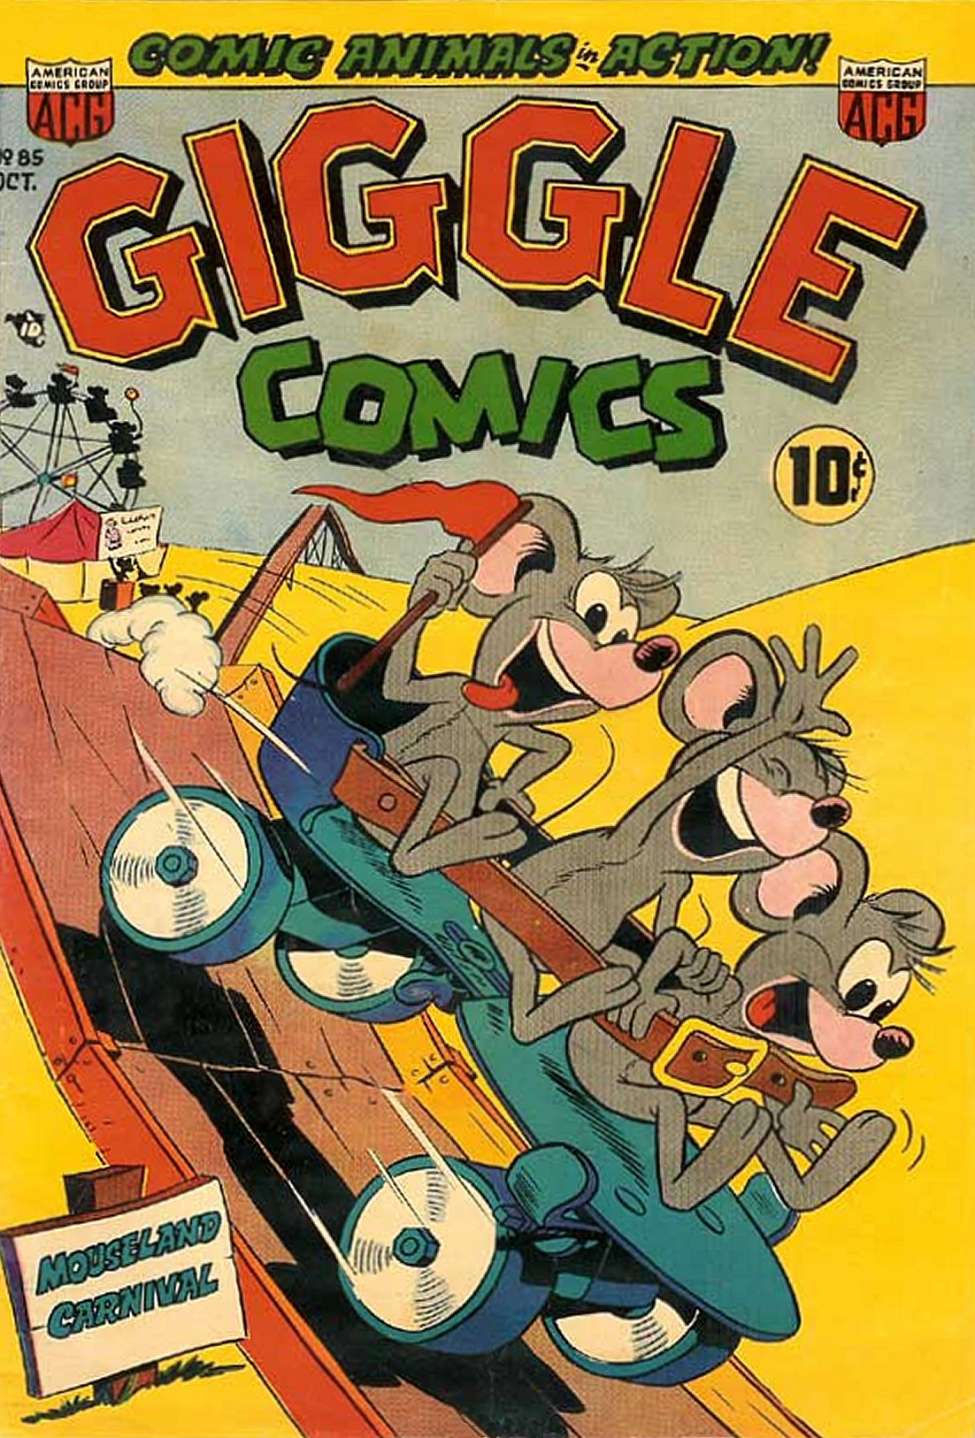 Book Cover For Giggle Comics 85